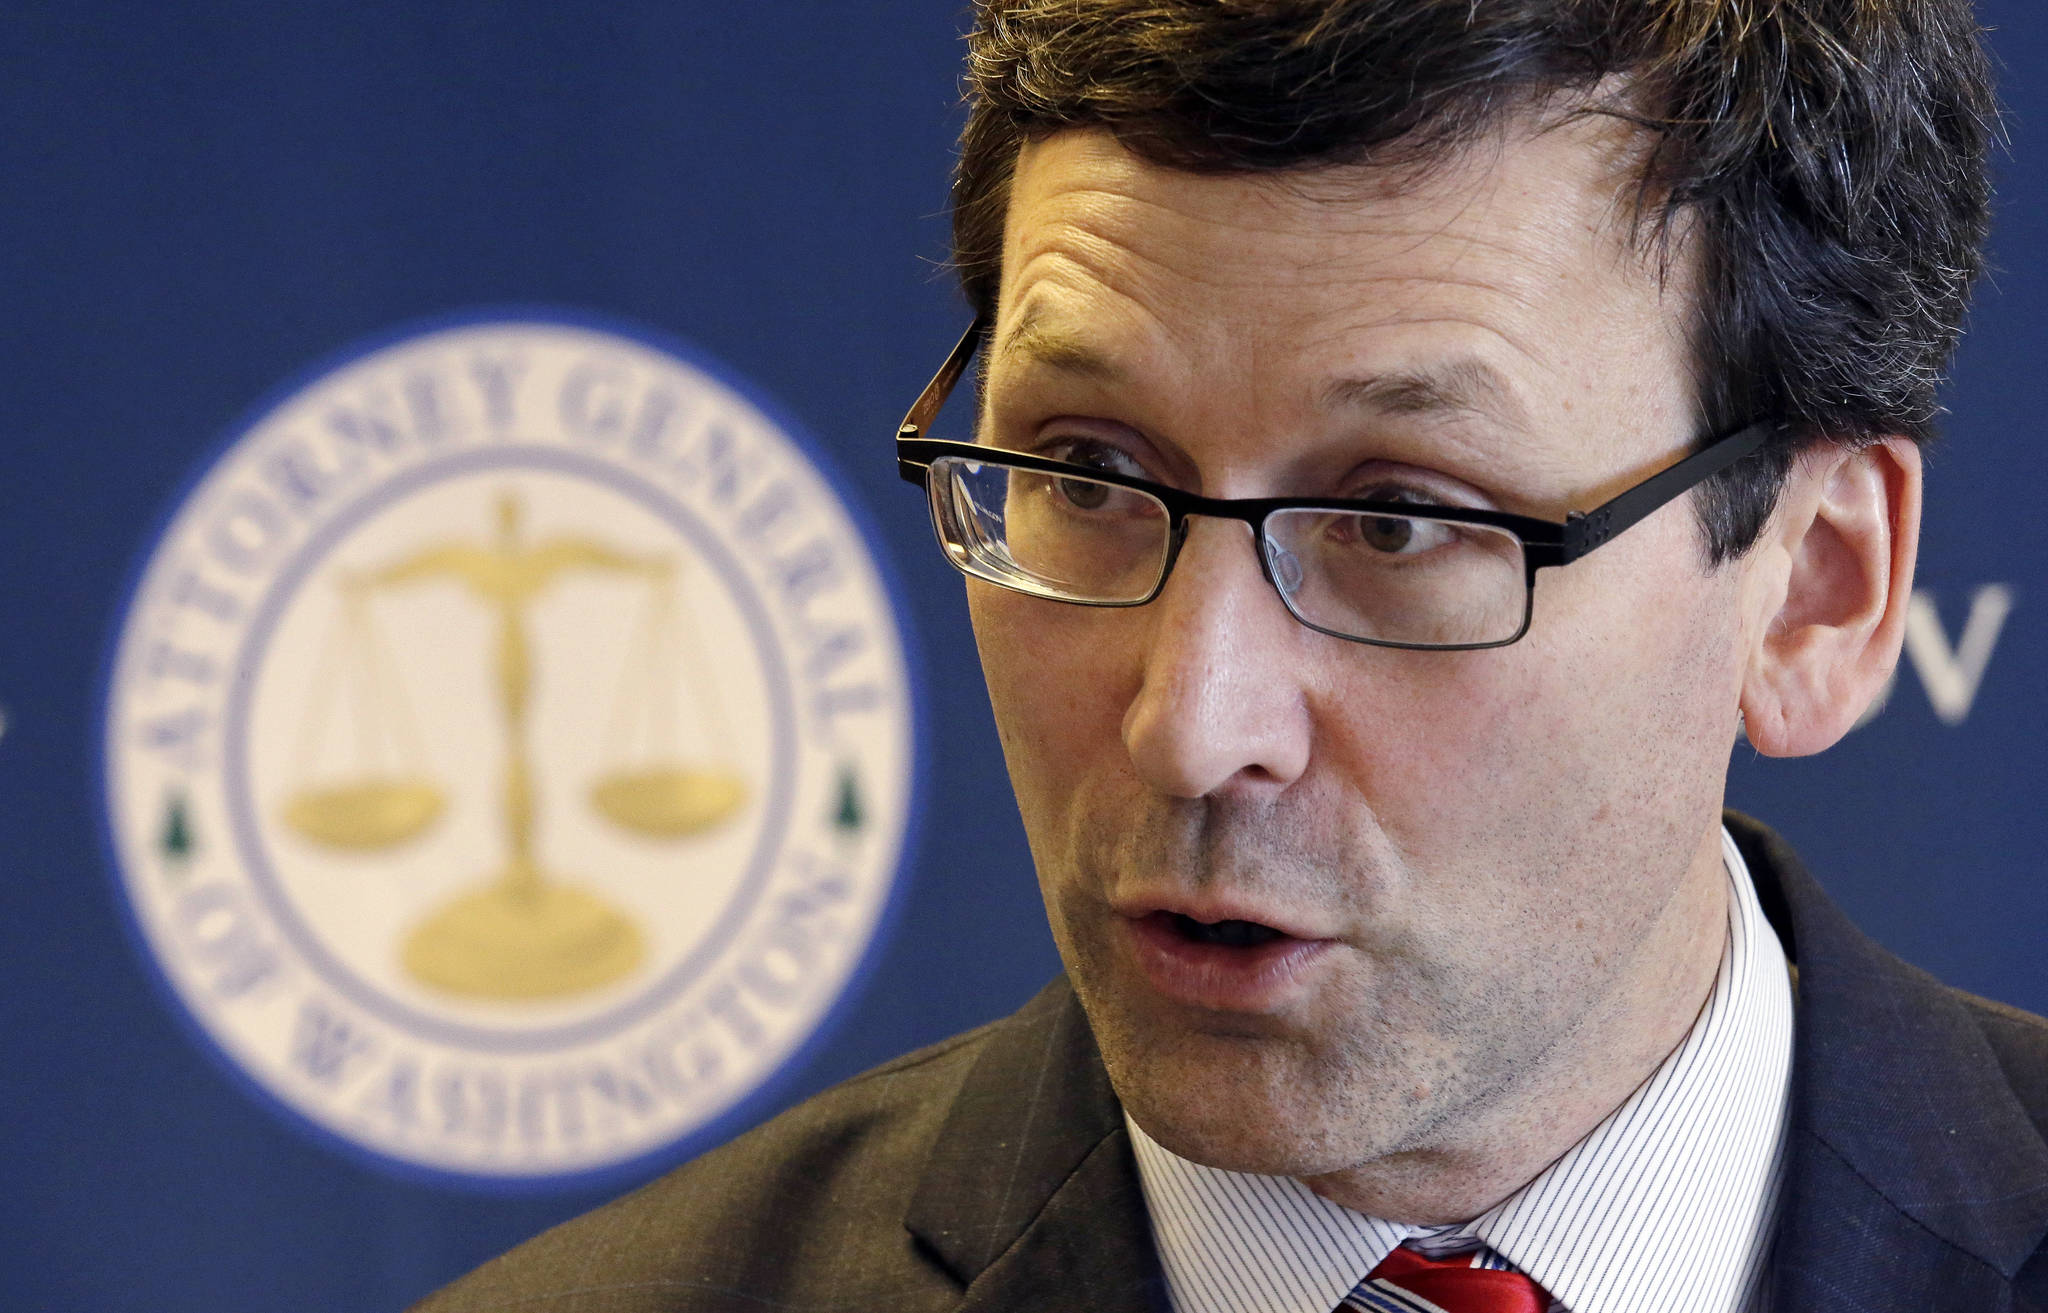 Washington State Attorney General Bob Ferguson speaks about President Trump’s new executive order at a news conference Monday in Seattle. (Elaine Thompson/The Associated Press)